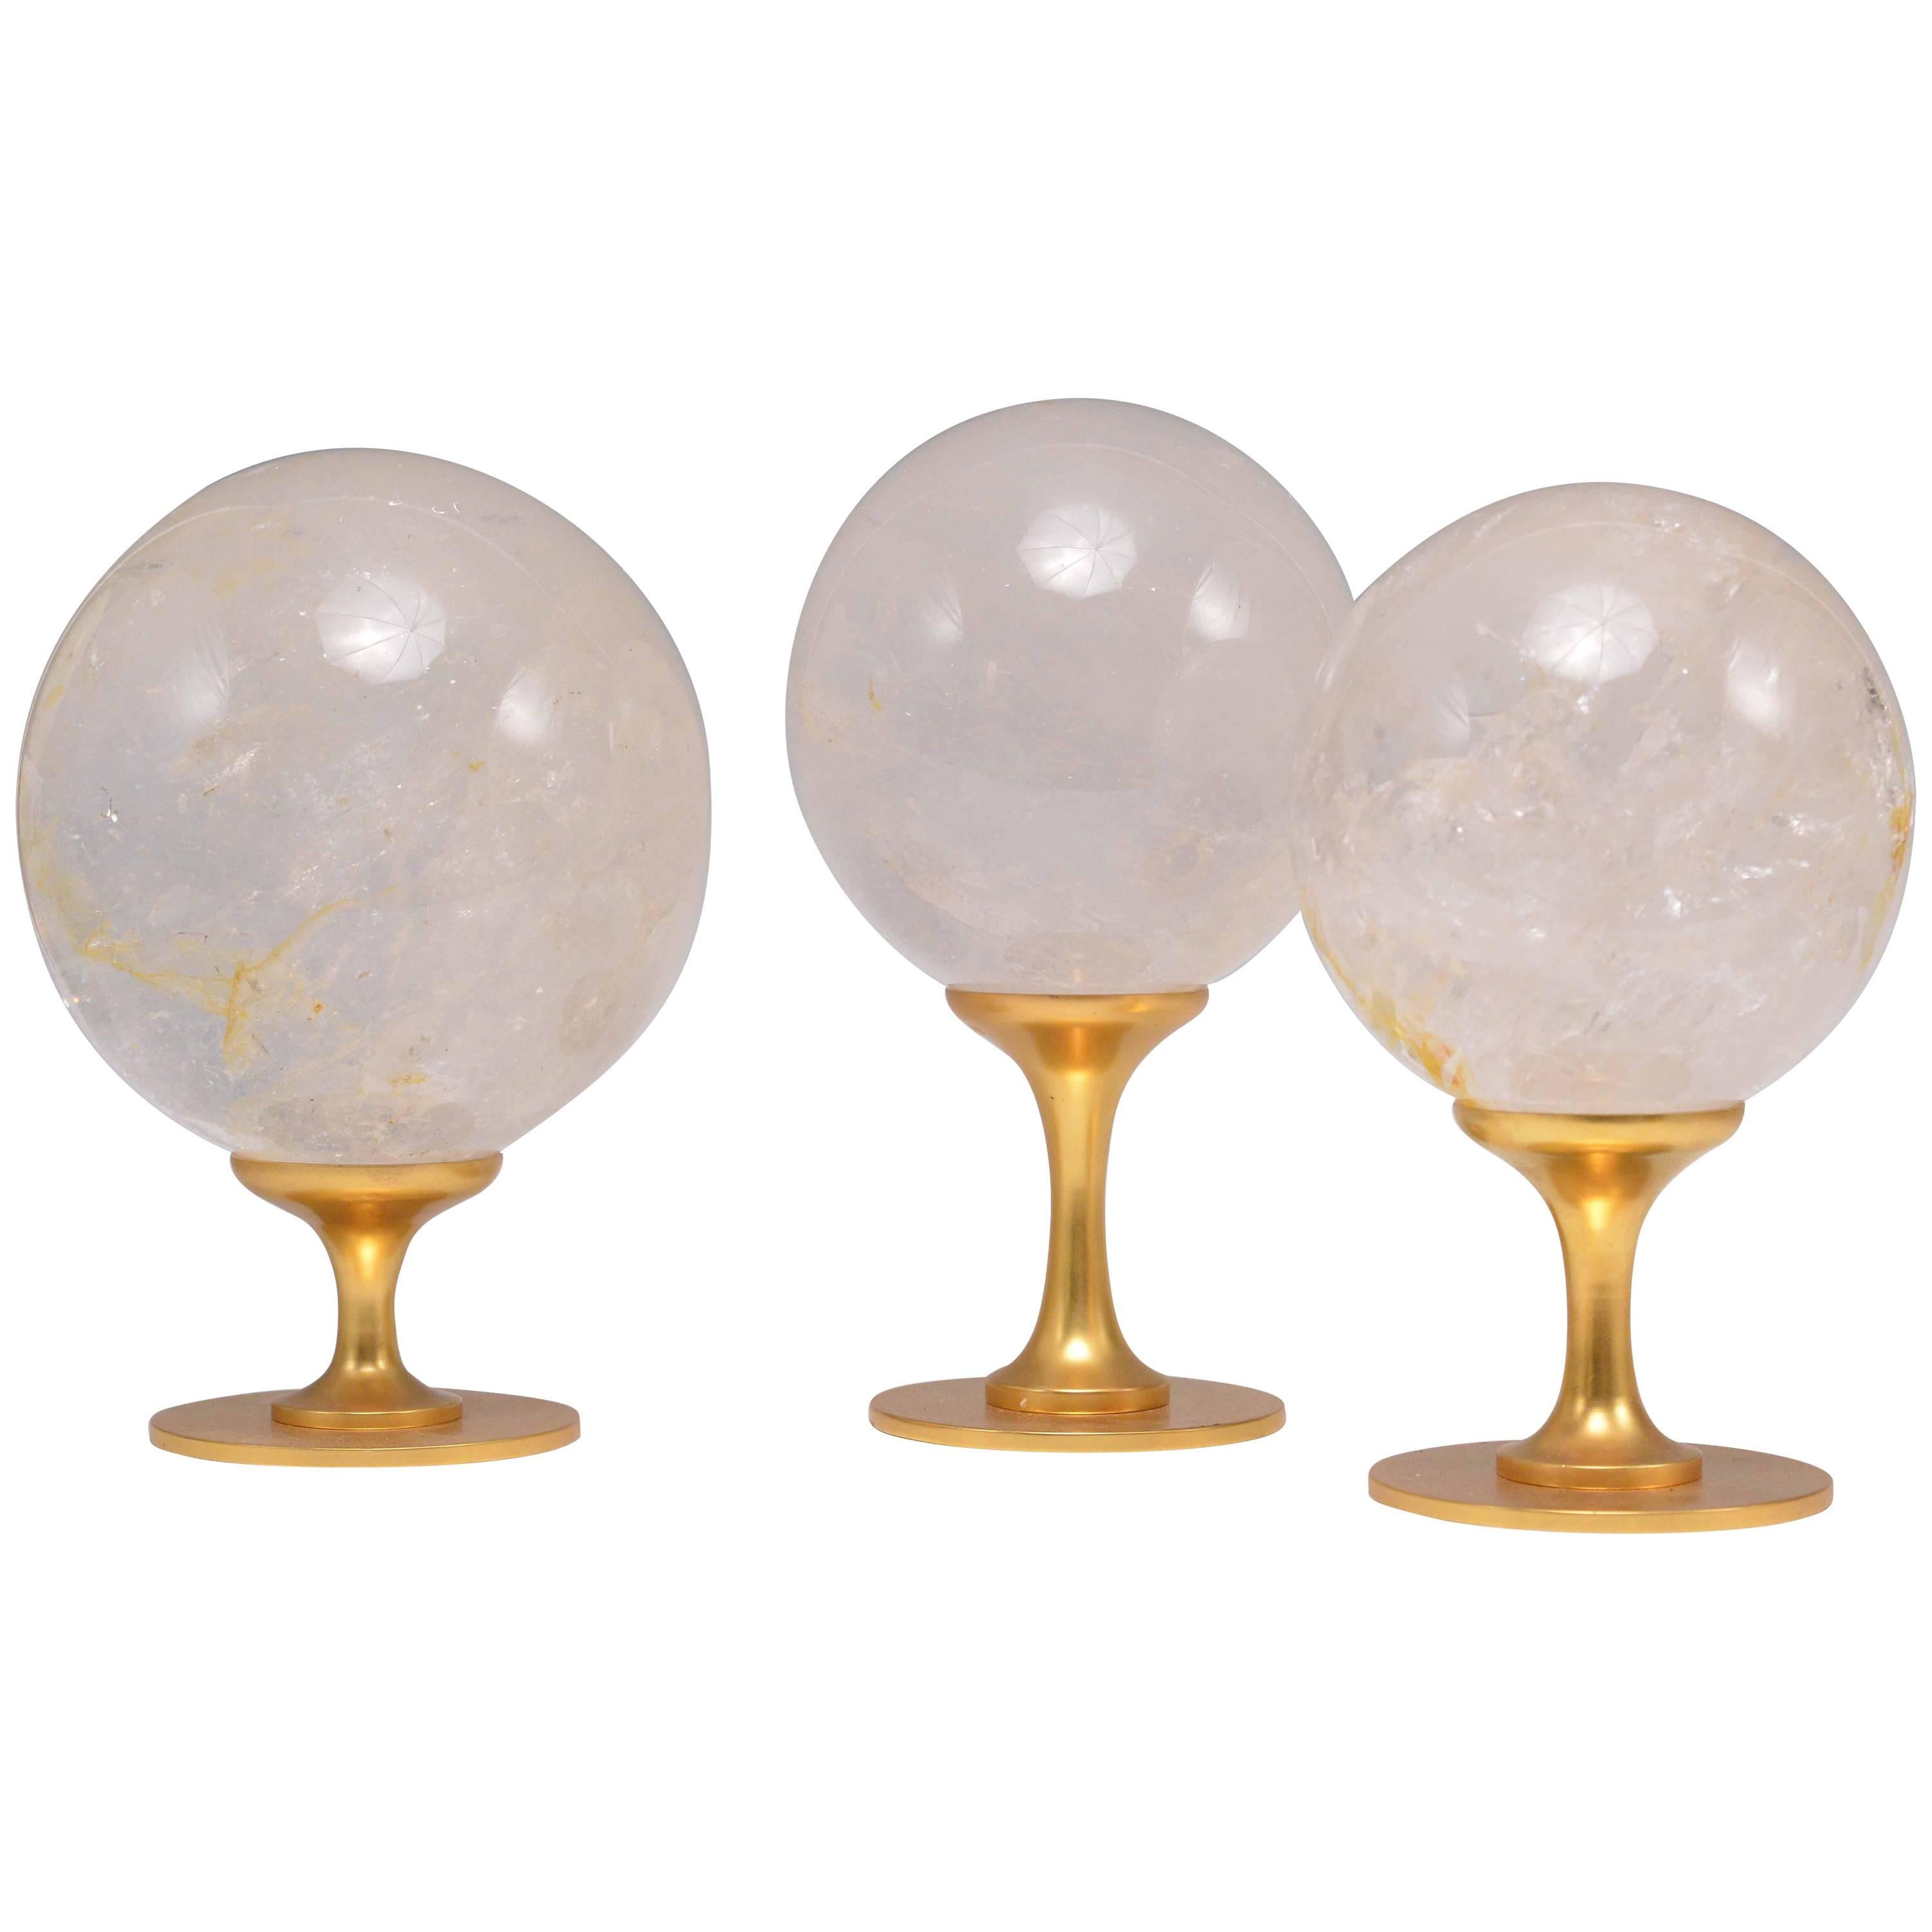 Group of Three Rock Crystal Balls For Sale